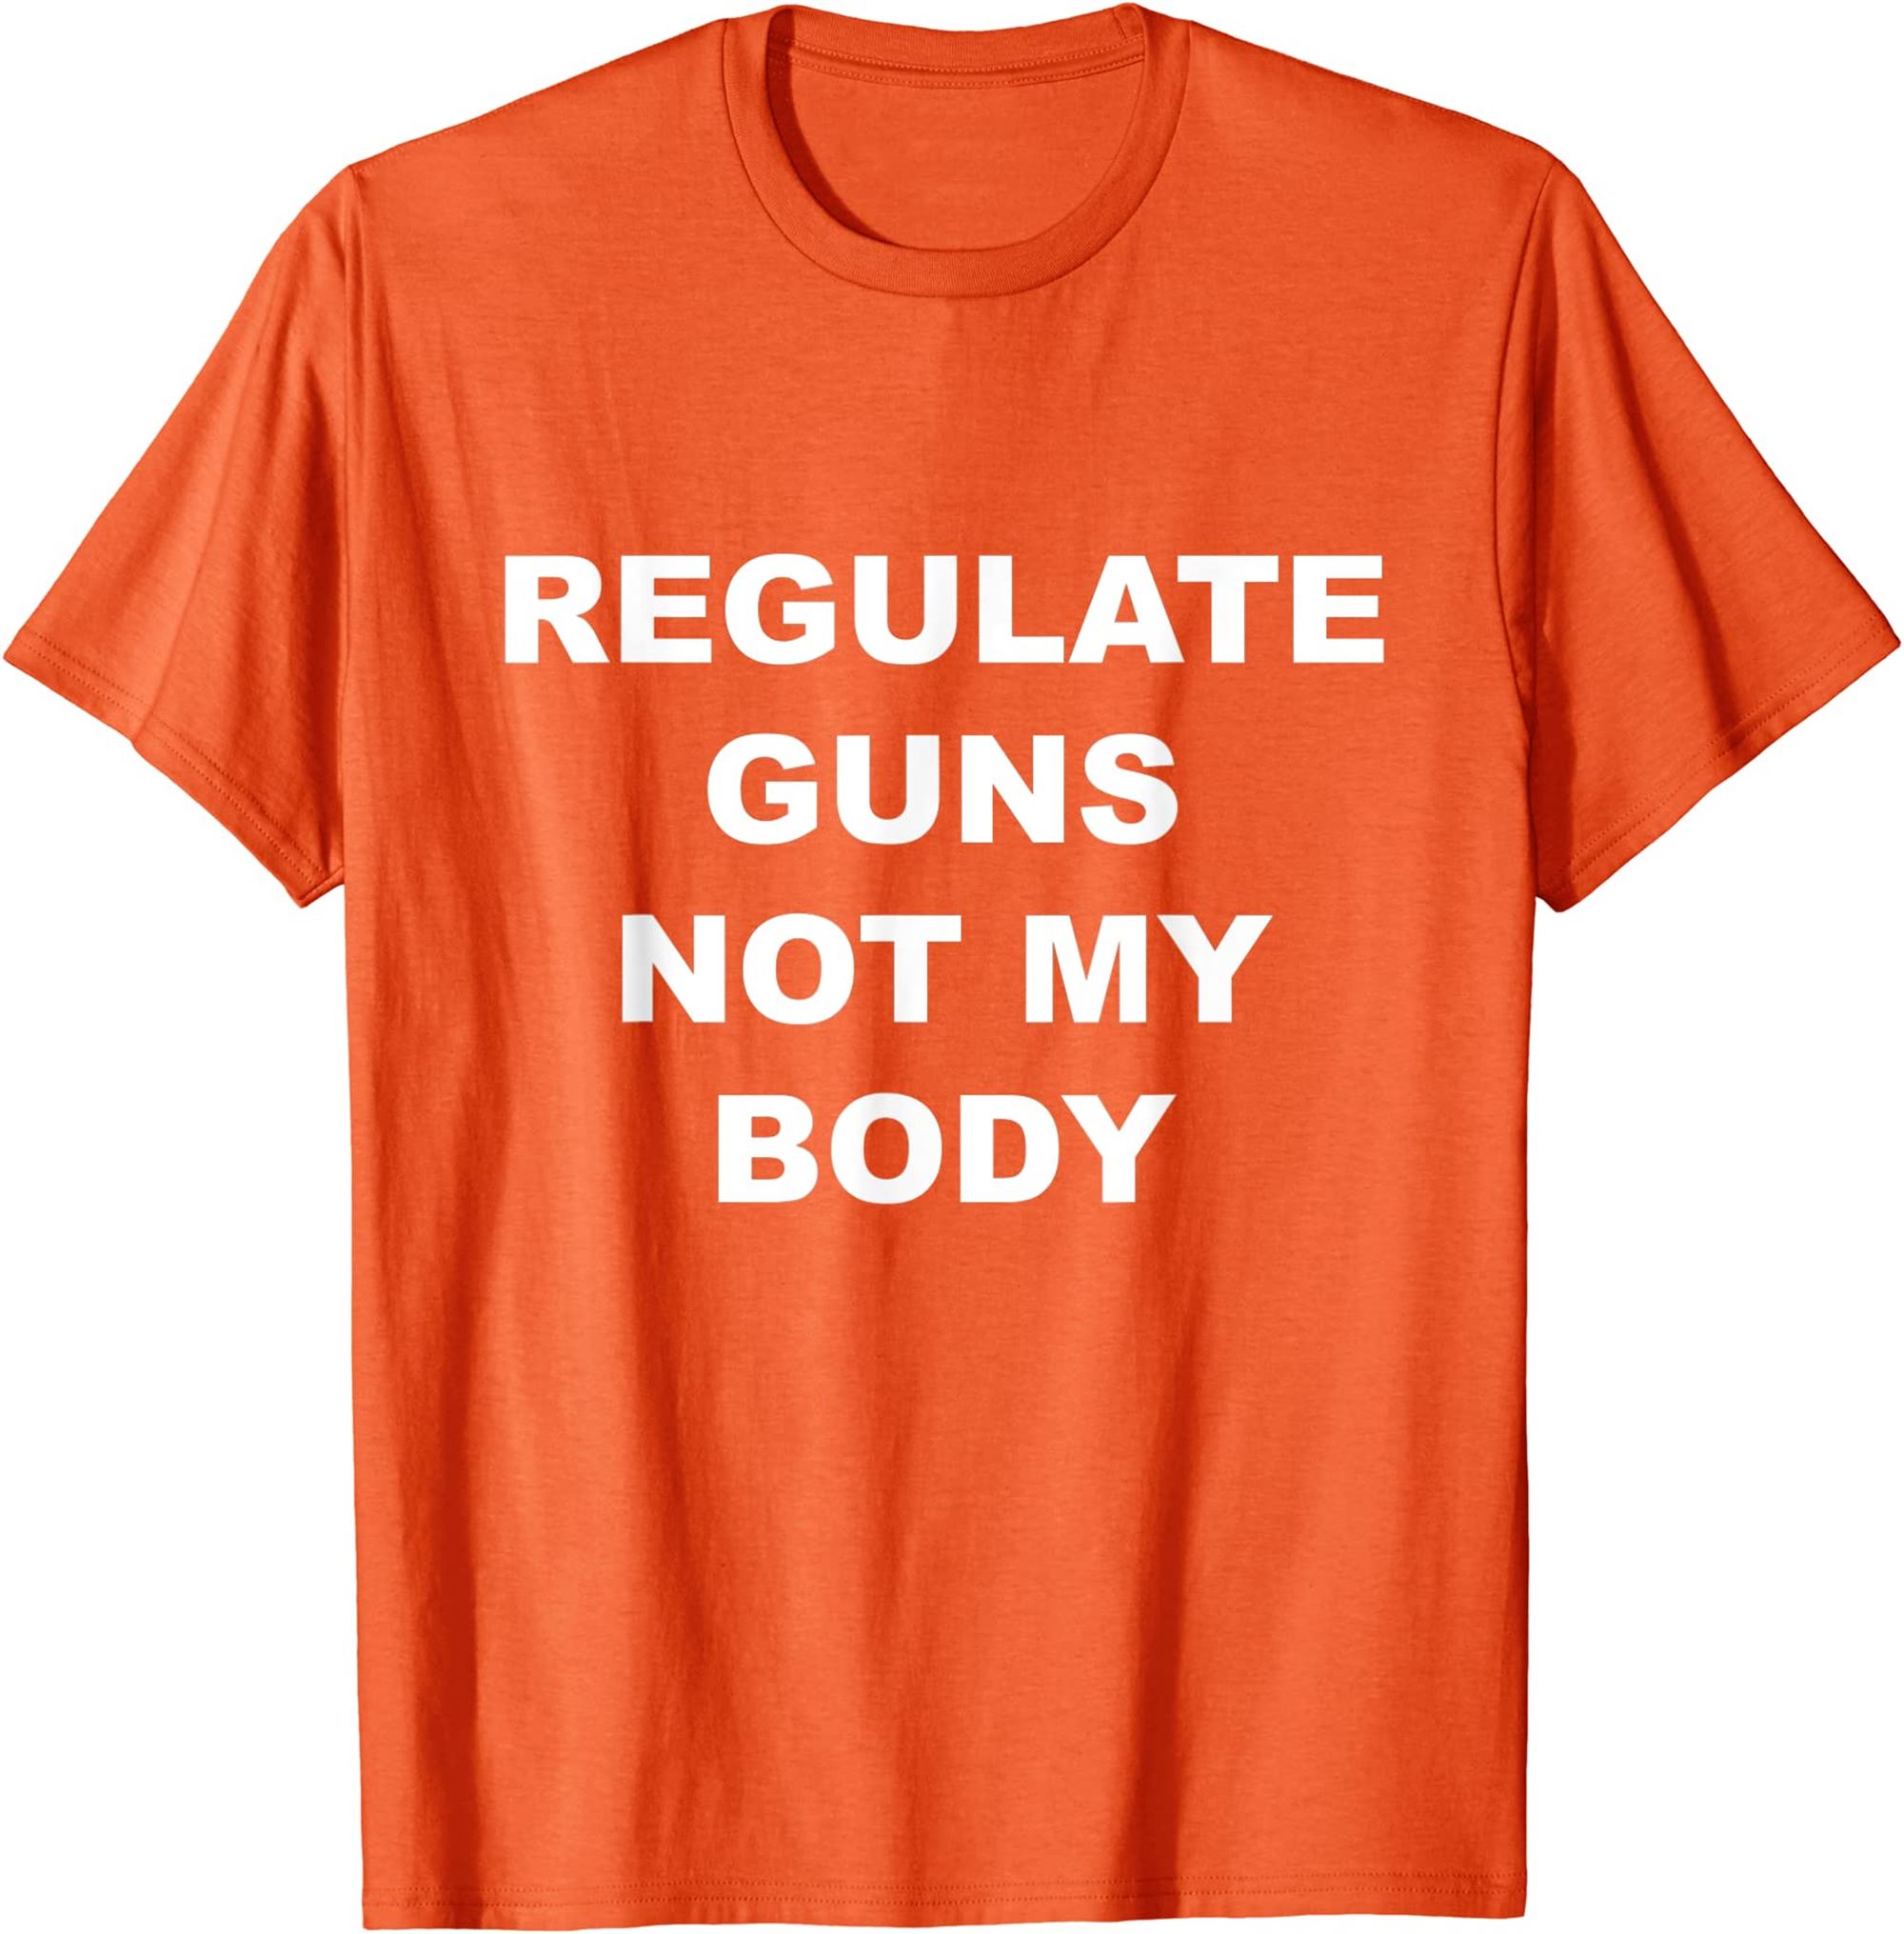 Regulate Guns Not My Body Orange Color T-shirt Plus Size Up To 5xl